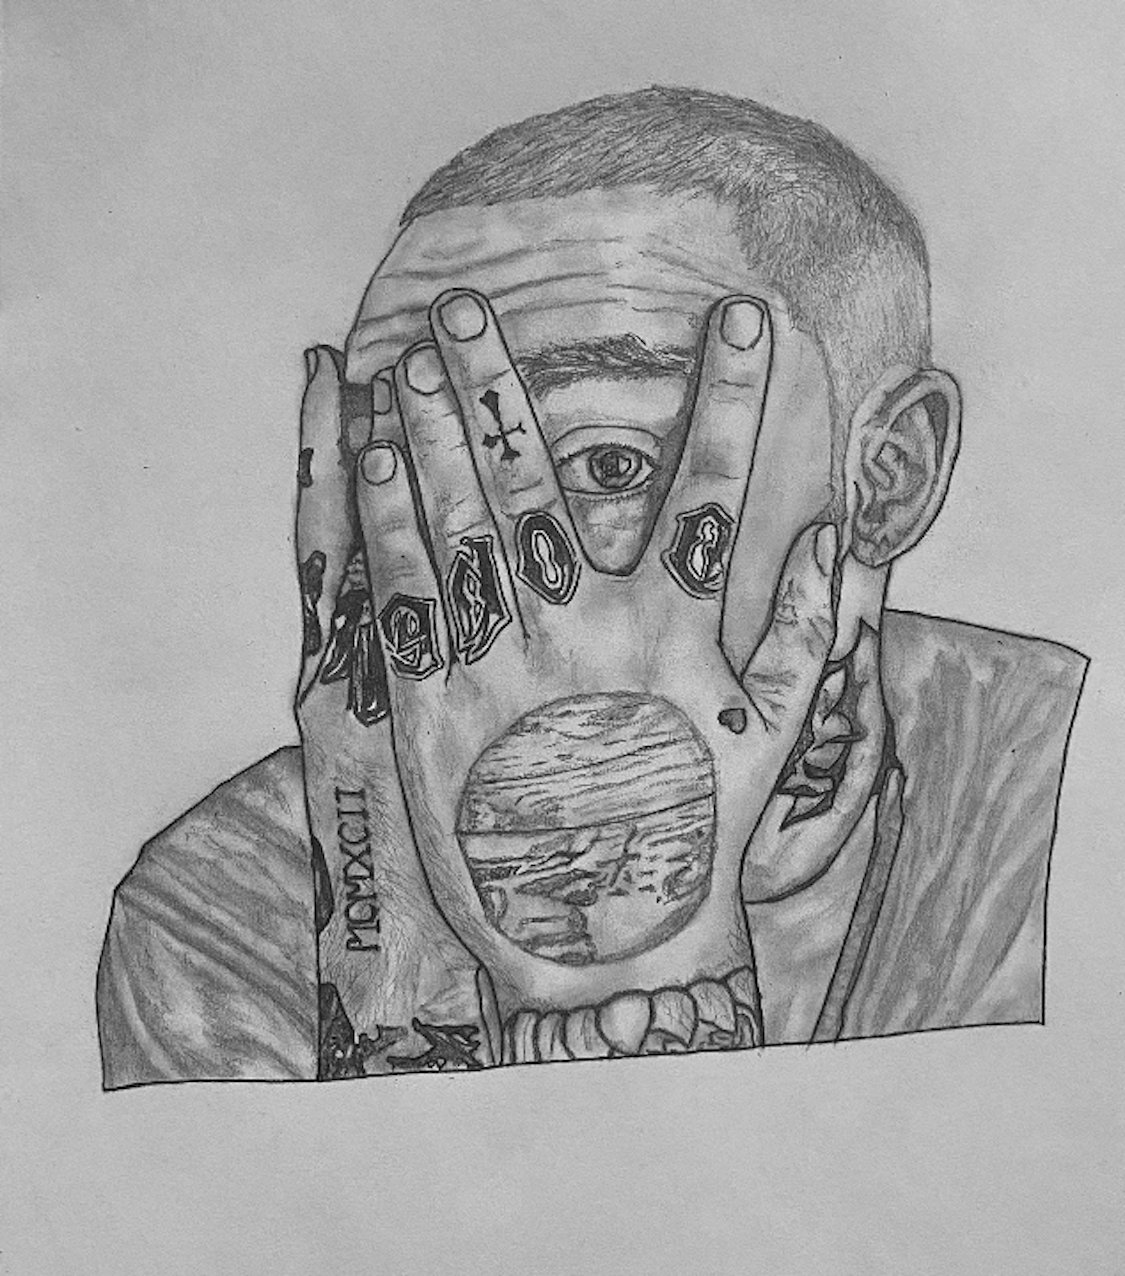 thumbnail of Portrait of Mac Miller by Anna Chelidze. Medium: Graphite on paper. Size 8.5 x 11.5 inches Date 2020